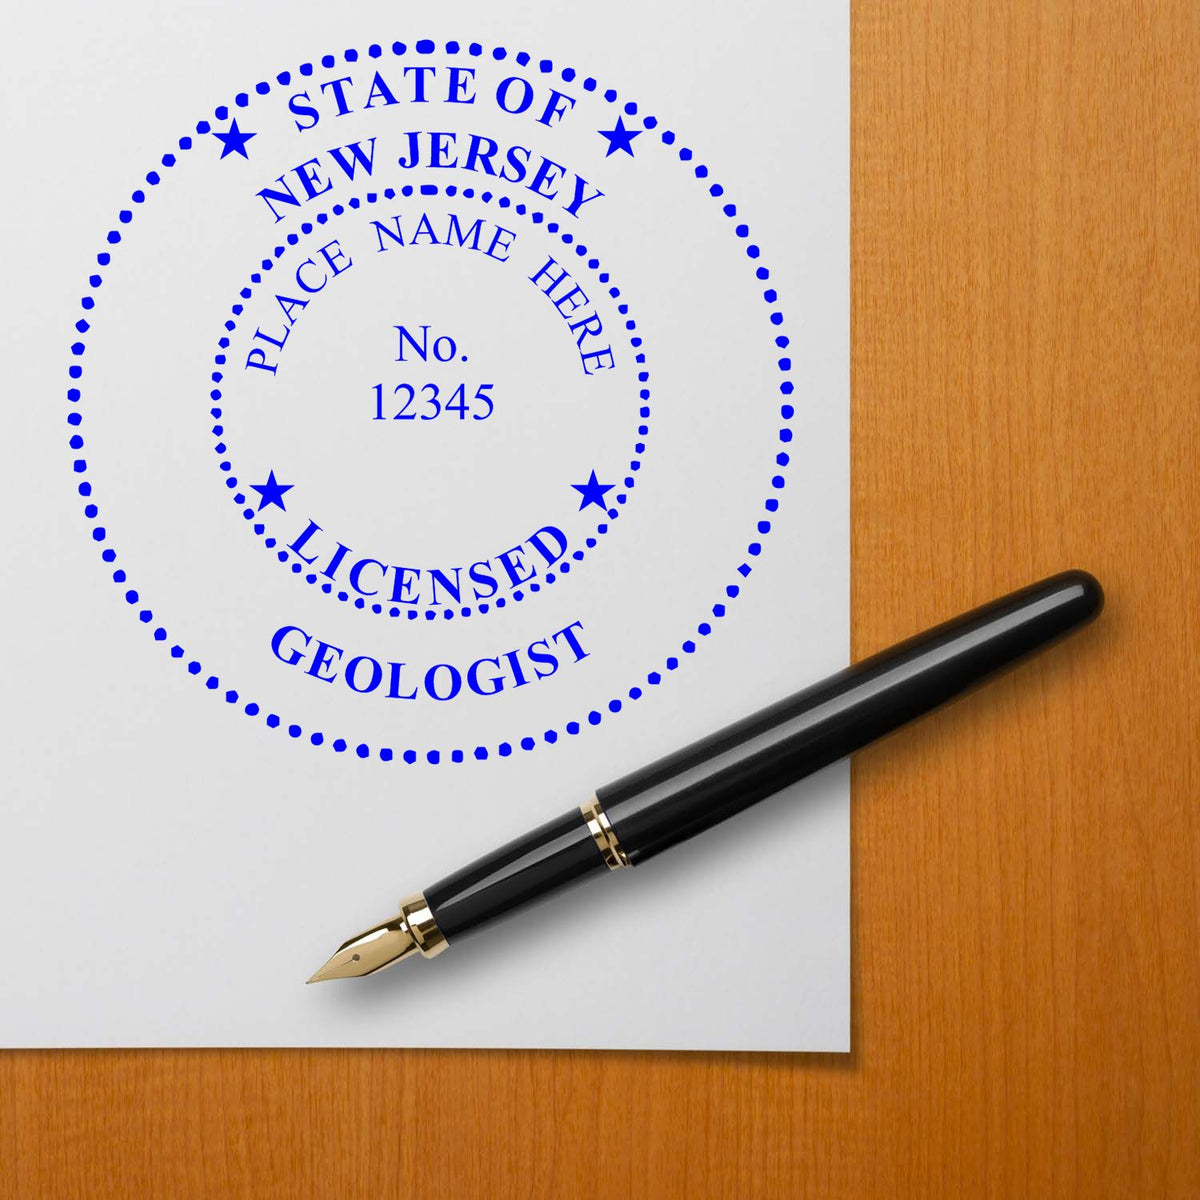 The Slim Pre-Inked New Jersey Professional Geologist Seal Stamp stamp impression comes to life with a crisp, detailed image stamped on paper - showcasing true professional quality.